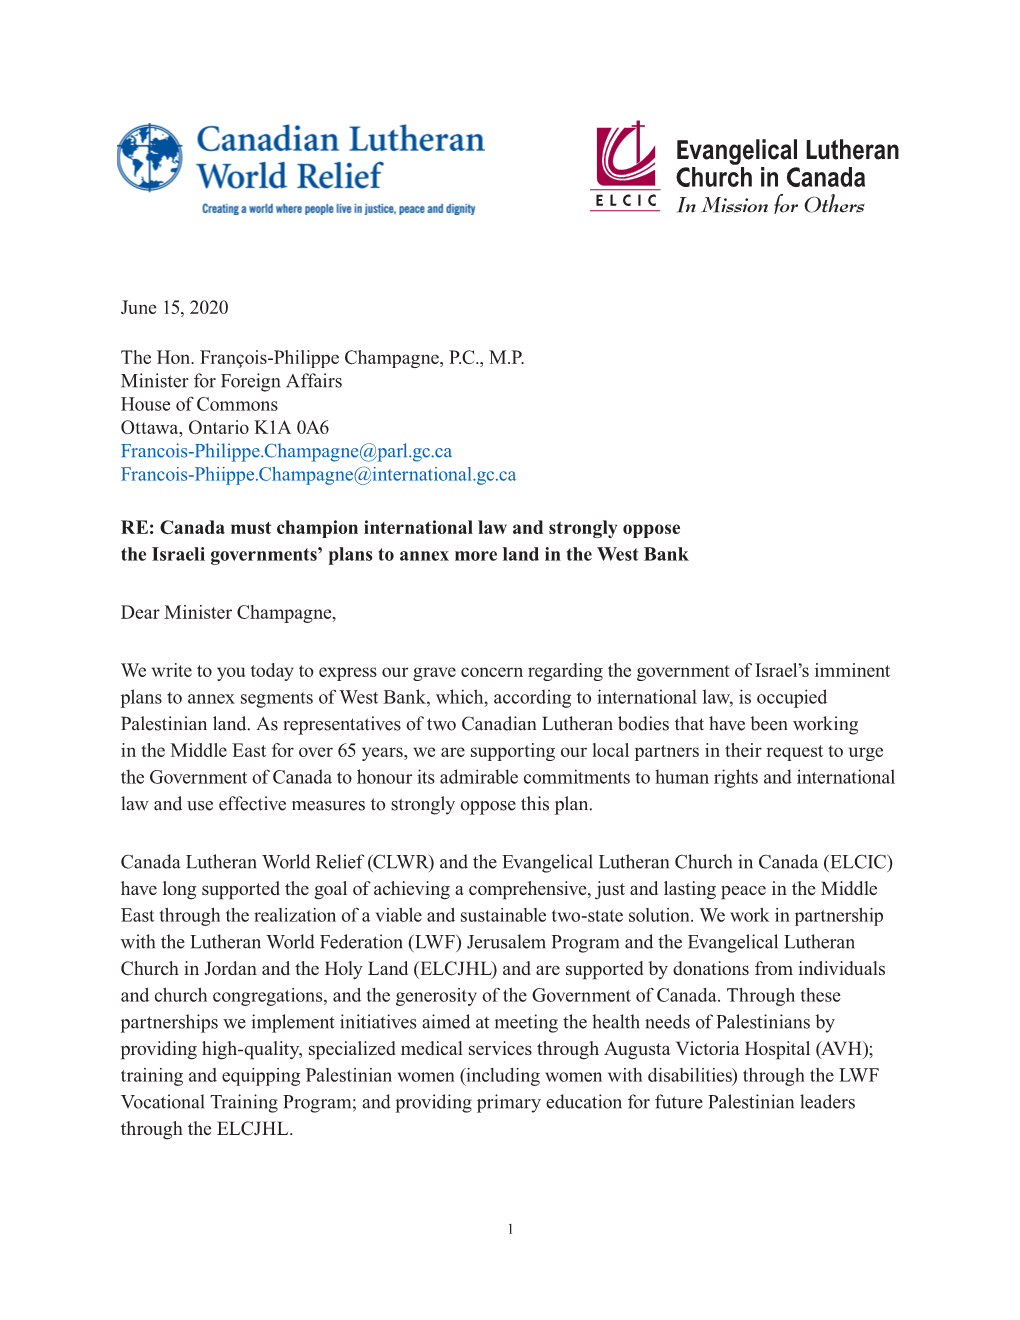 A Joint Letter from CLWR and the ELCIC to the Canadian Minister Of